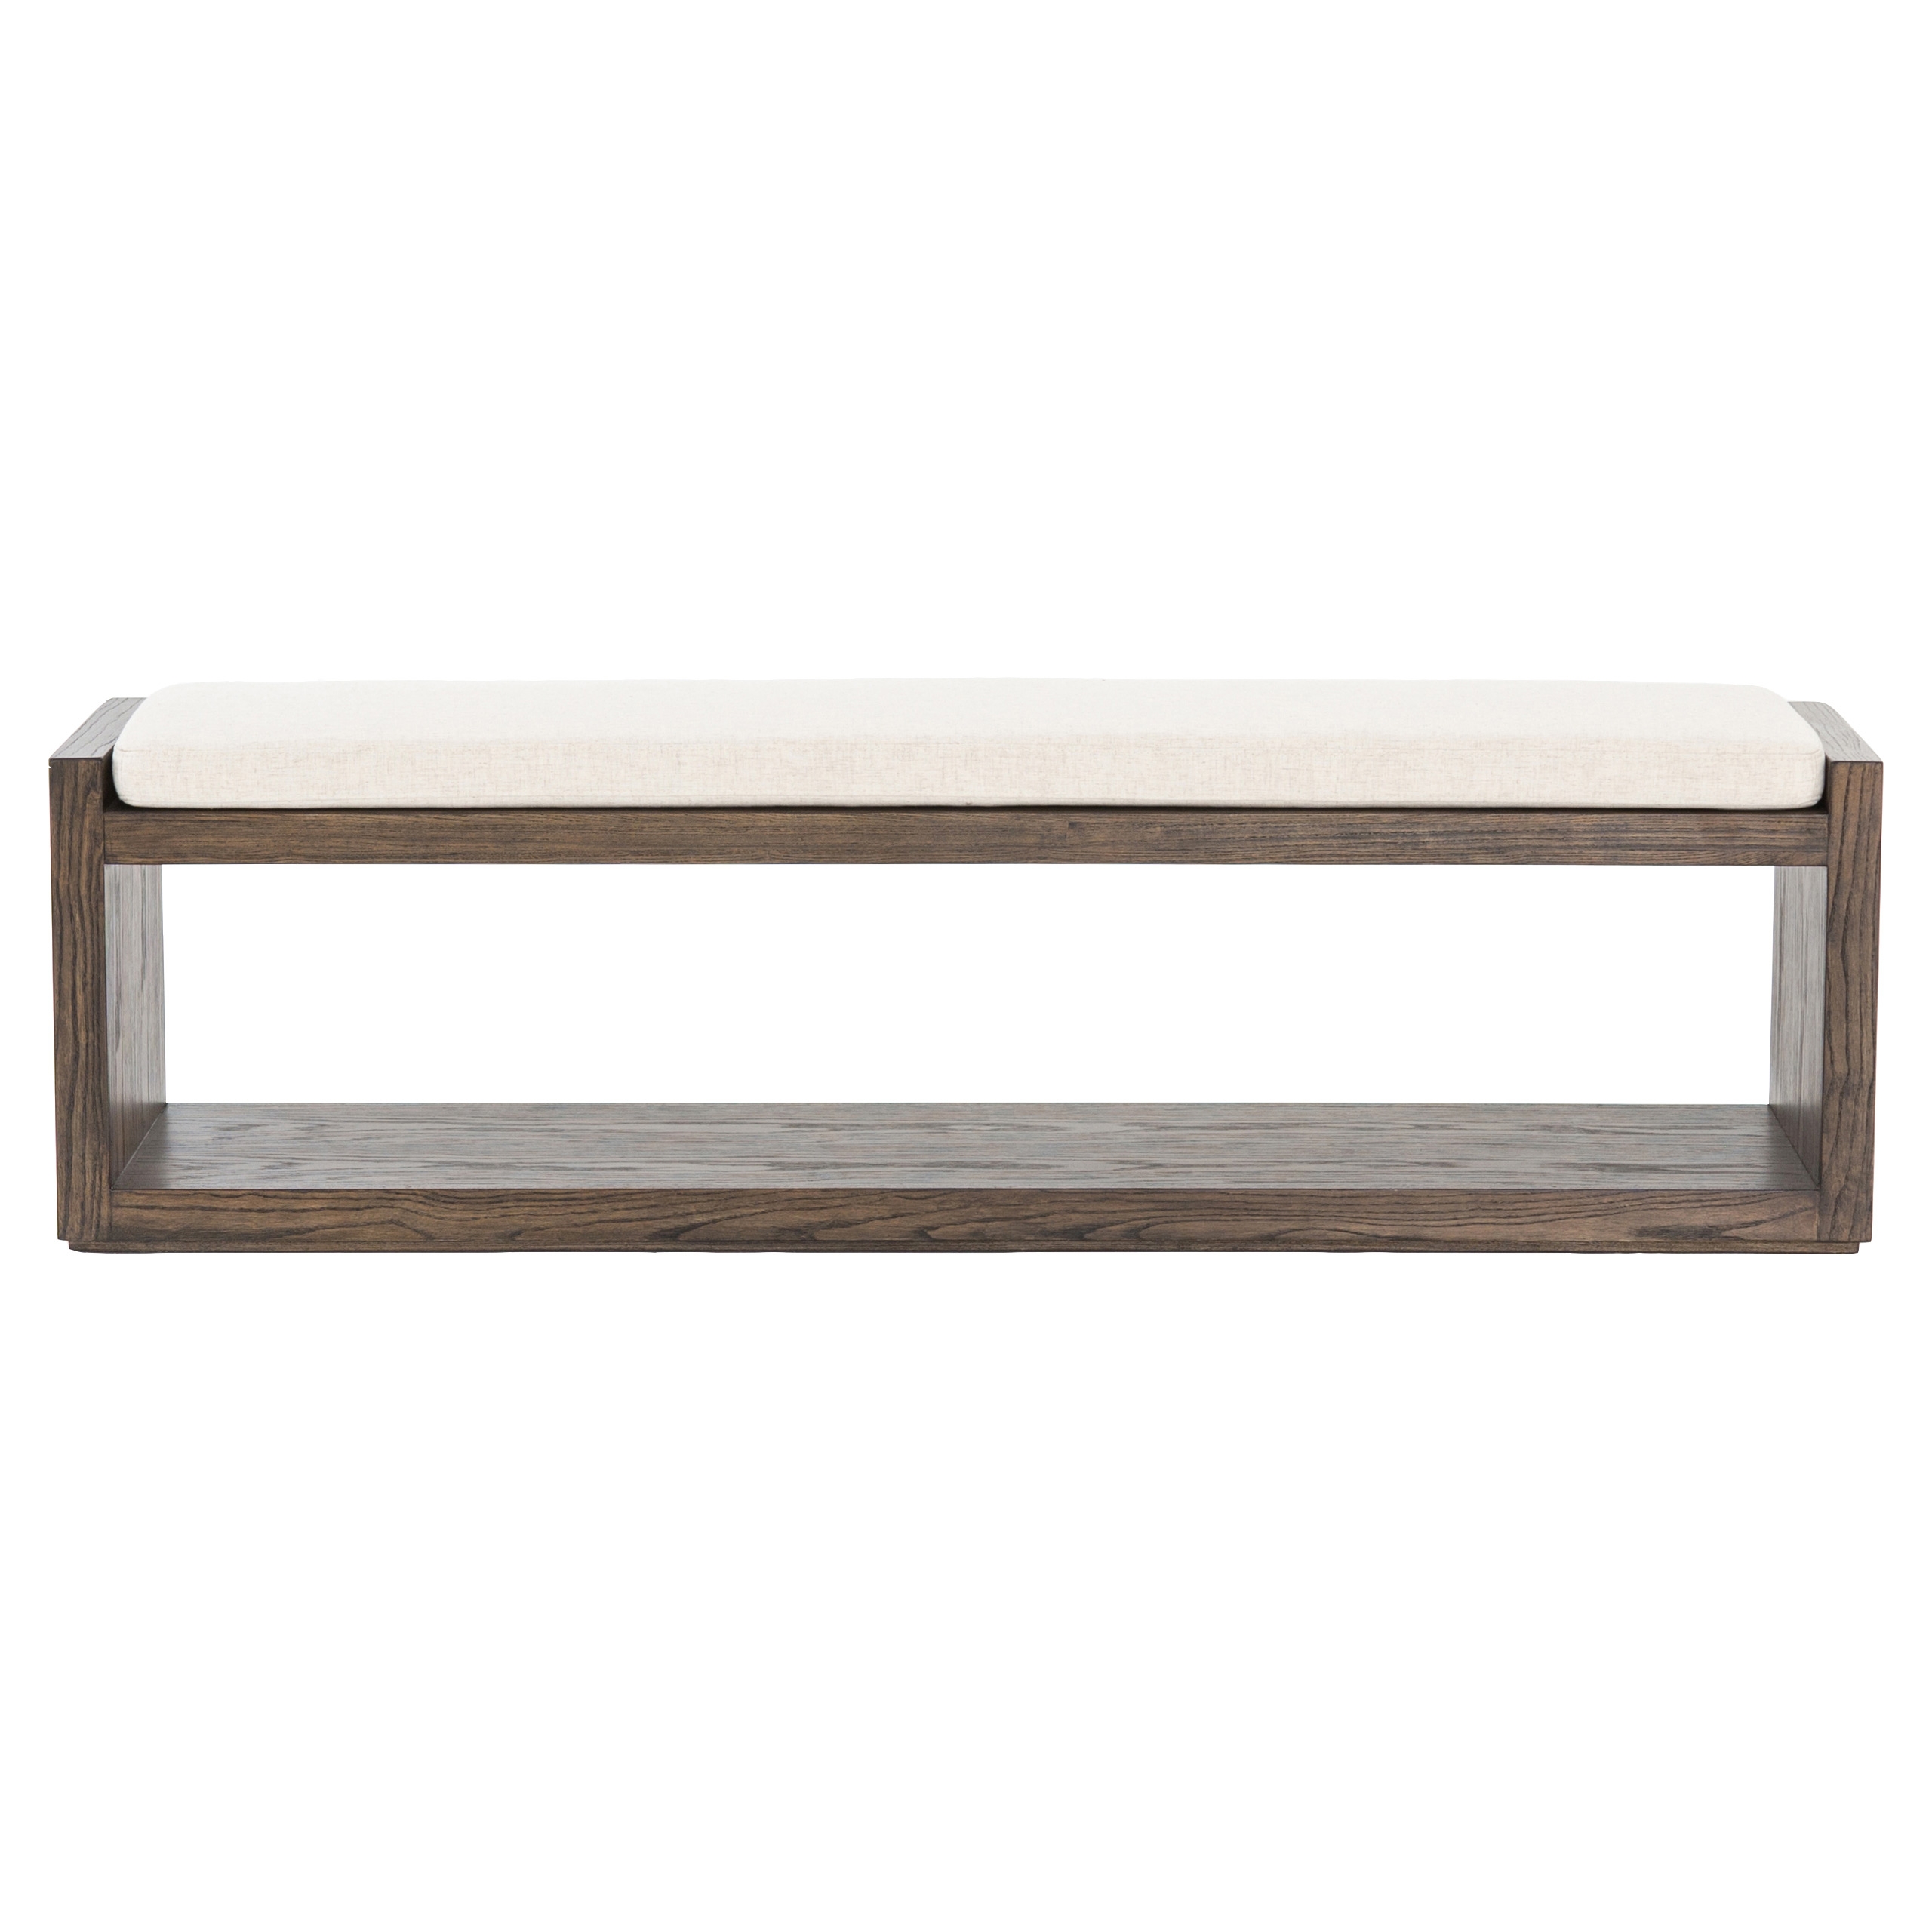 Emma Modern Classic White Cushion Solid Brown Wood Frame Bench - Image 1